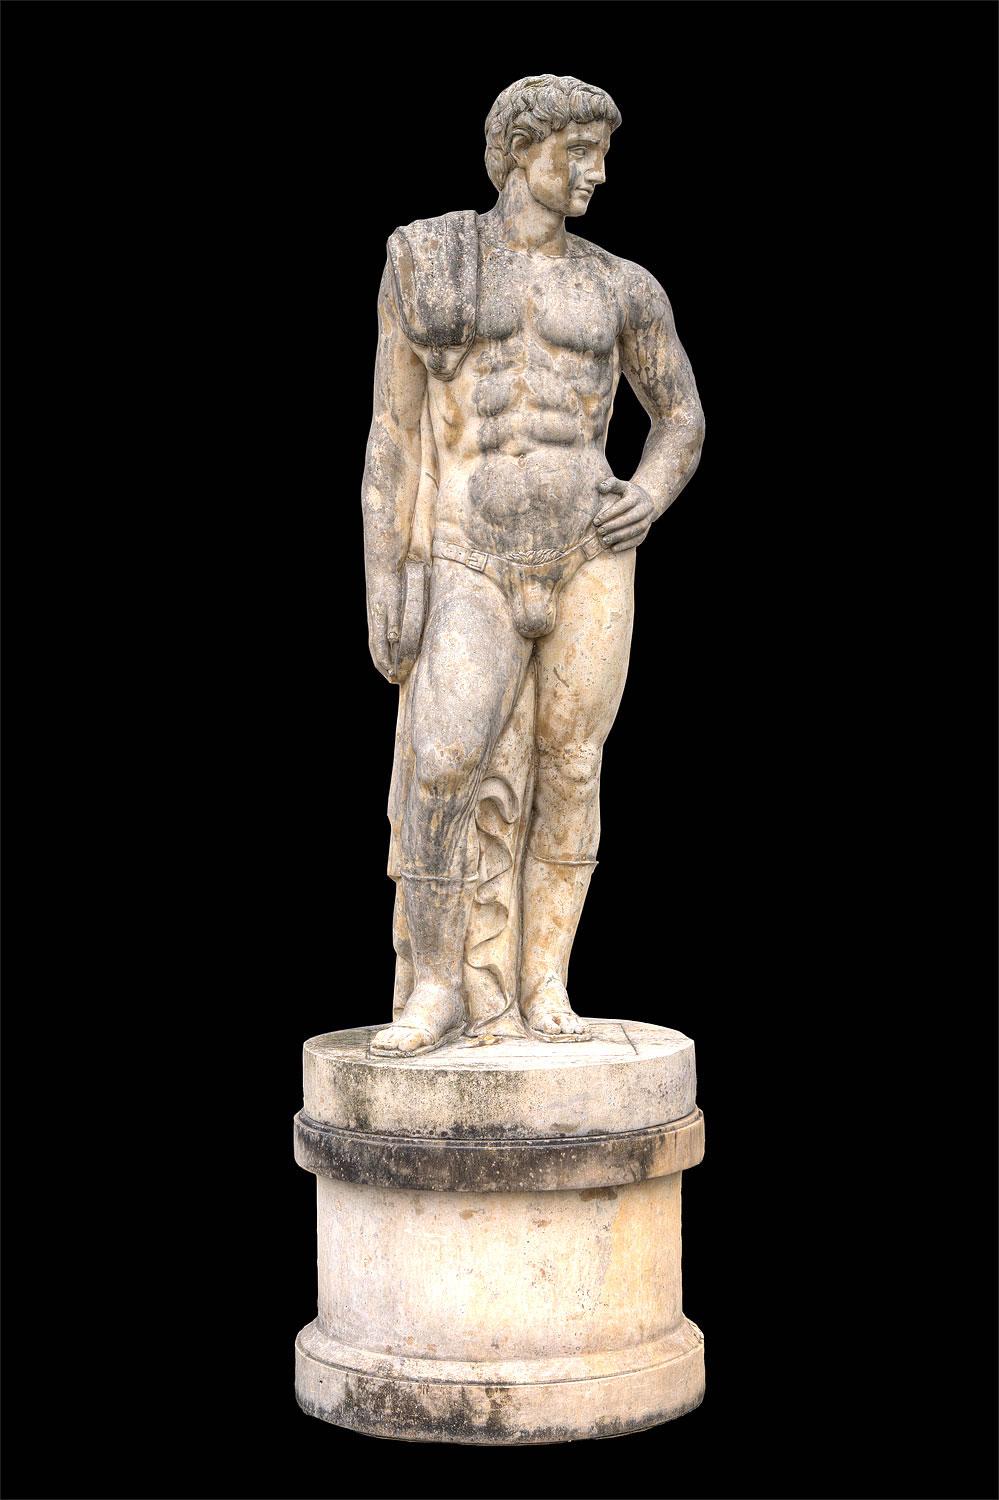  Monumental Italian Rationalist Marble Sculptures of Hercules and Discobolo For Sale 4